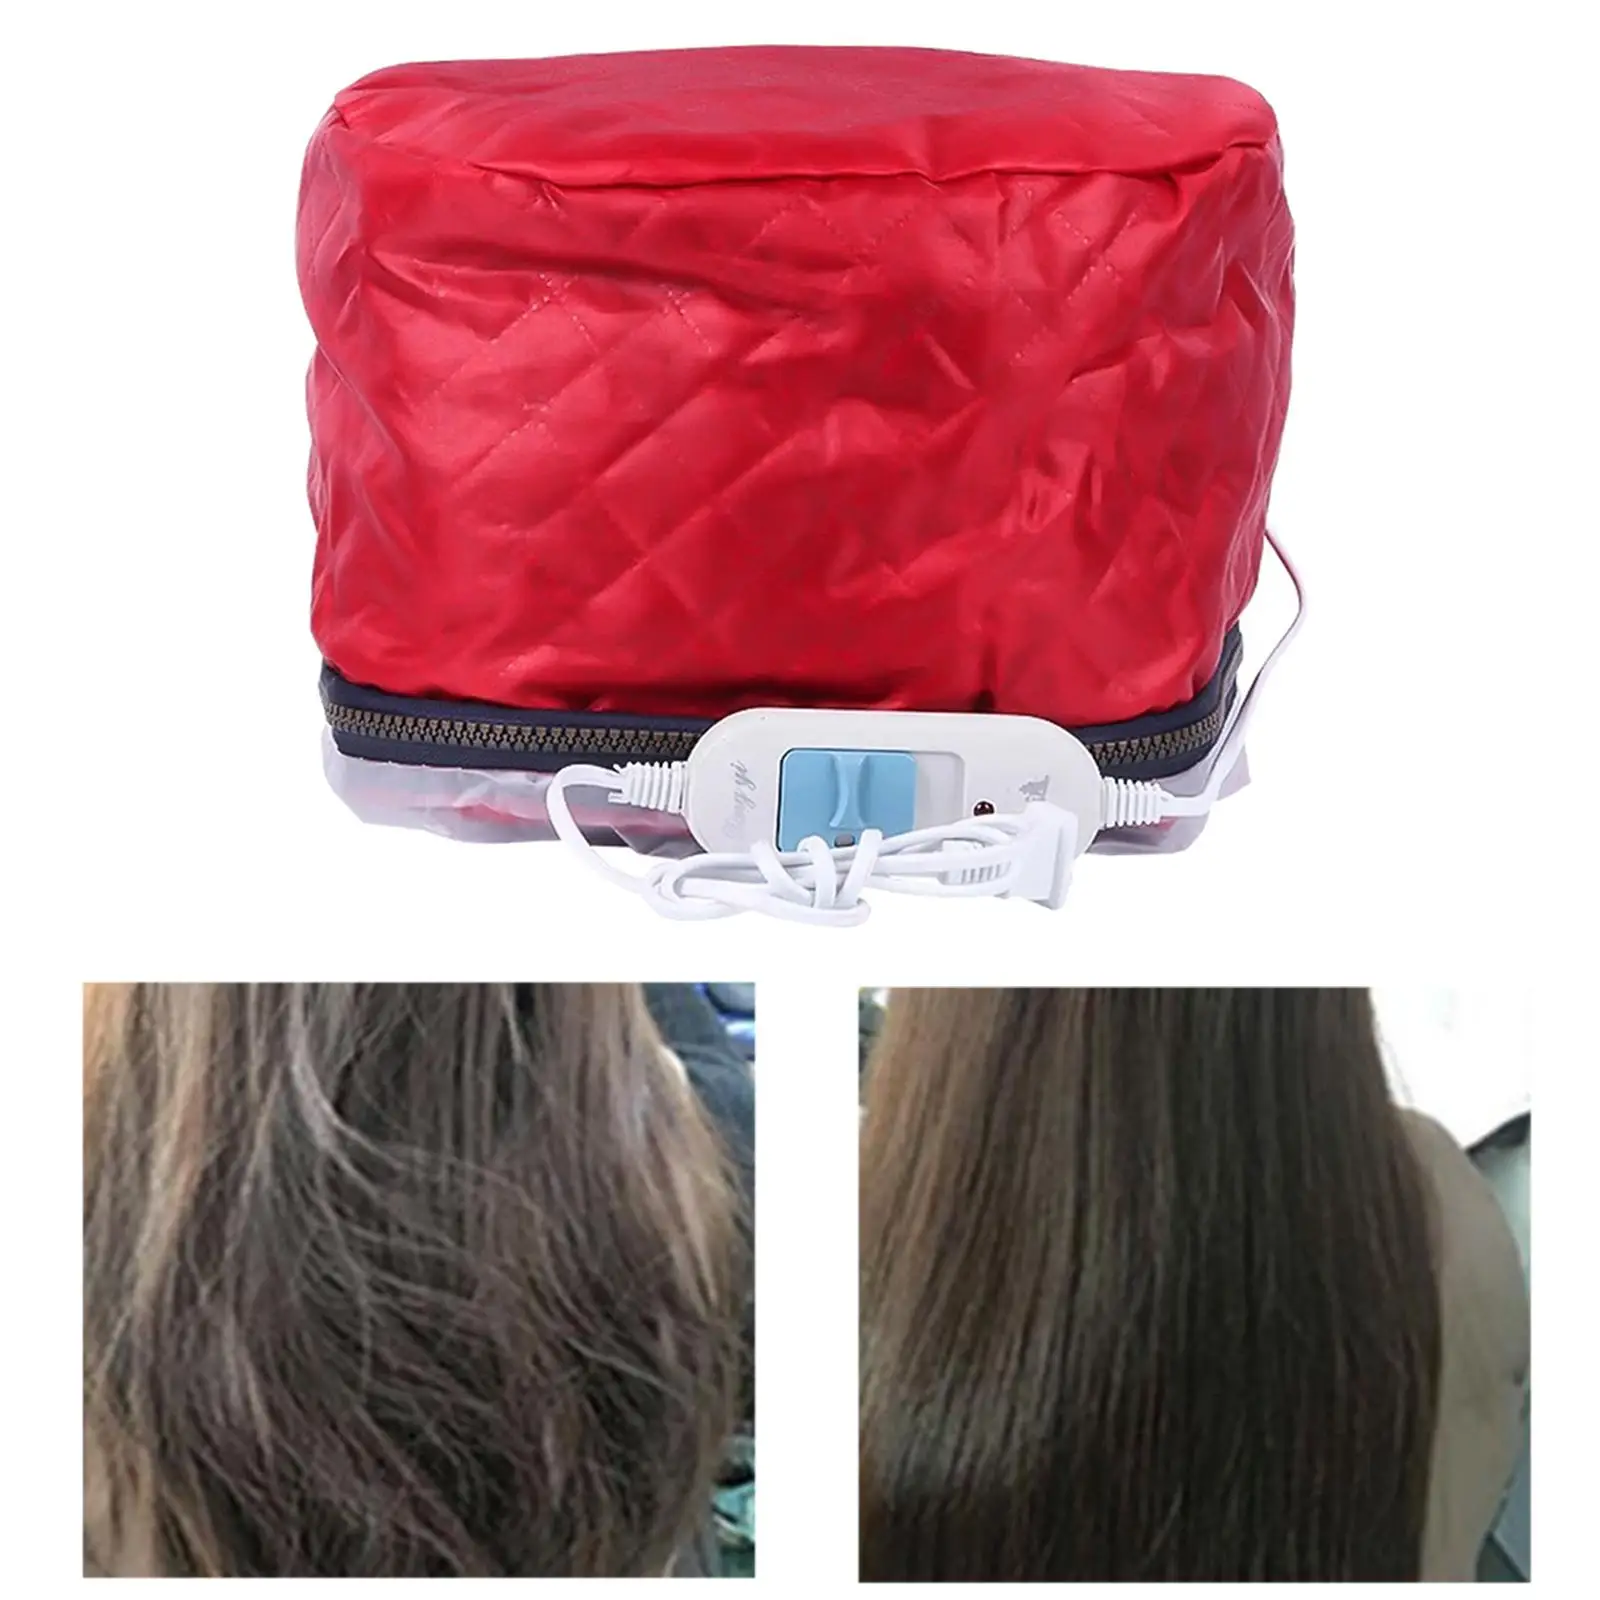 Hair Heating Caps Steamer 3-Modes Safe Household Red Hair Steamer for Deep Conditioning Home Salon Nourishing Hot SPA